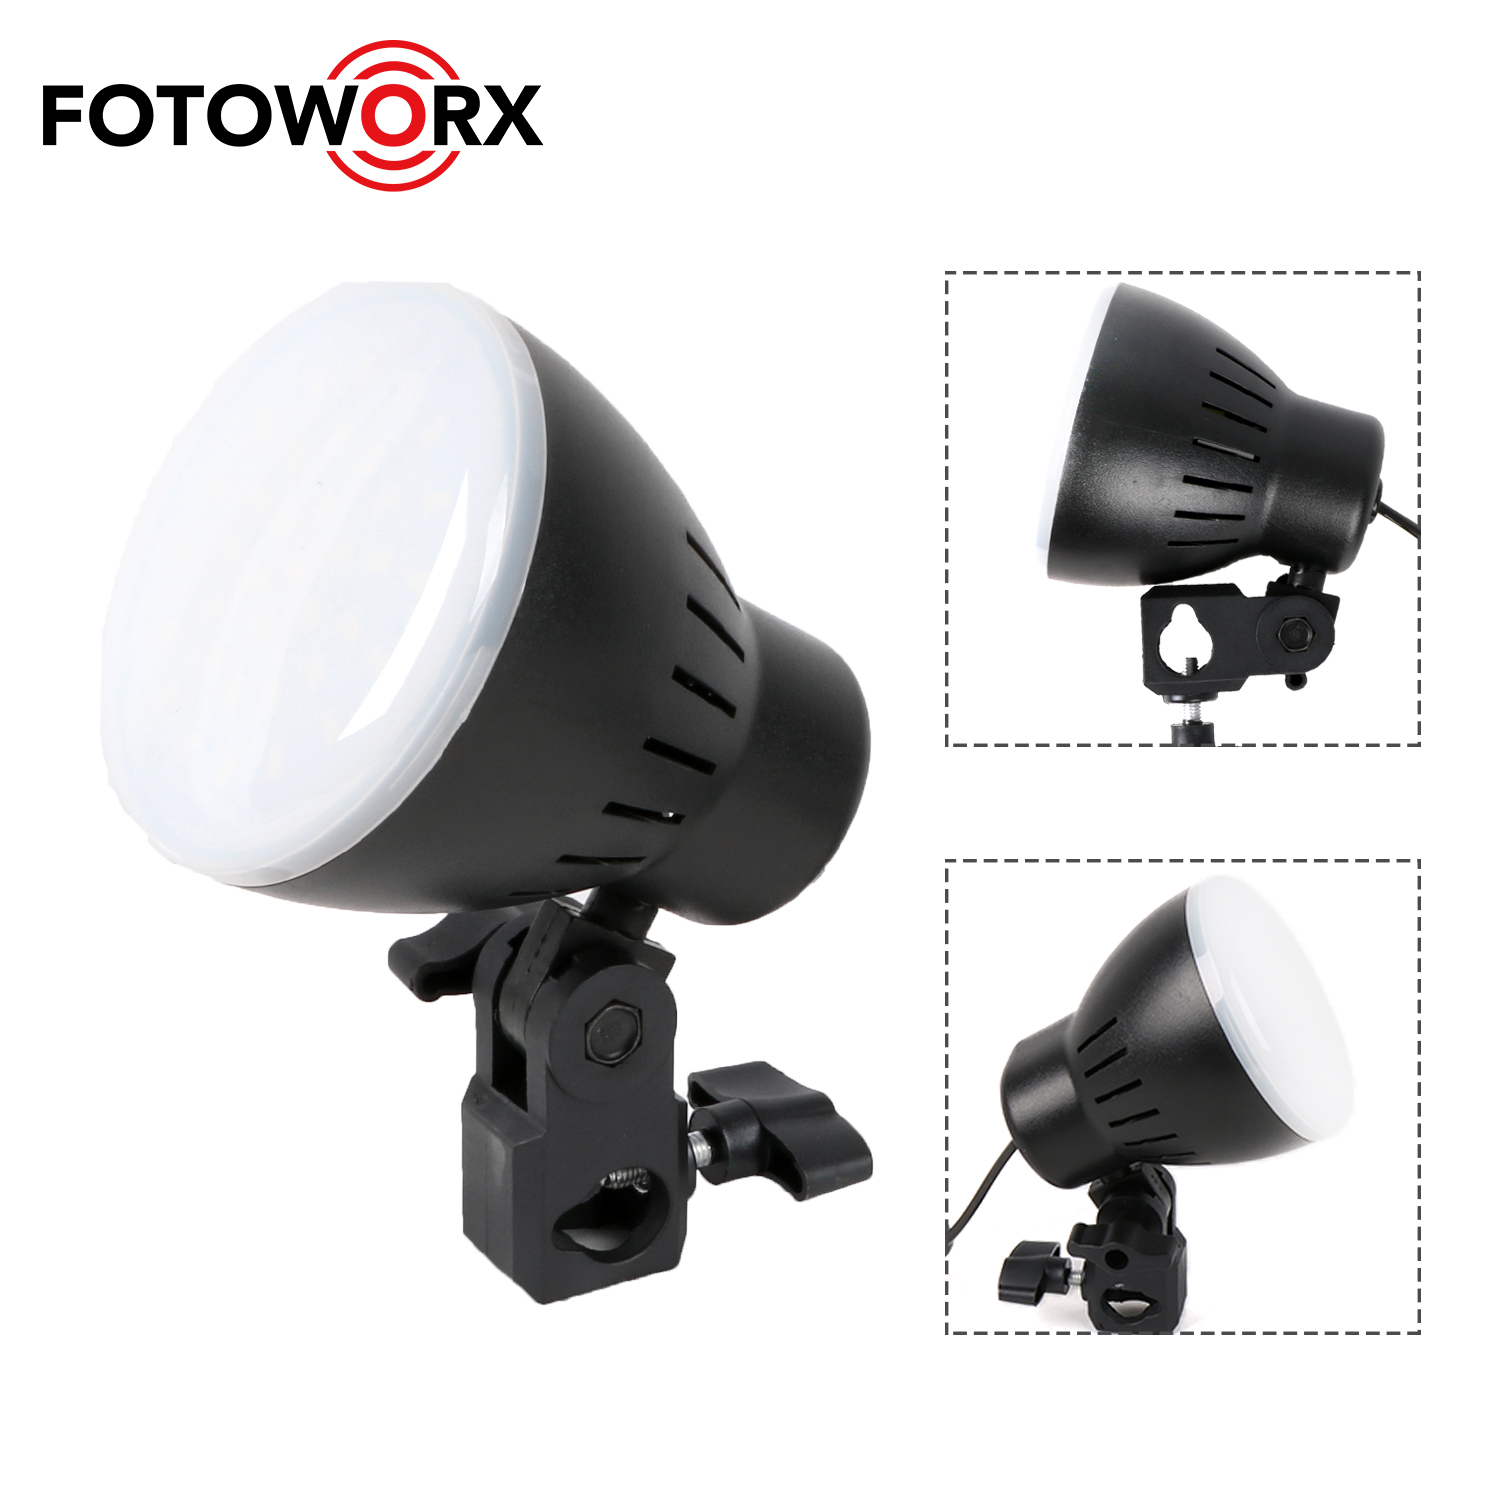 LED Portable Light Lamp 5500K with warm & cold color filter